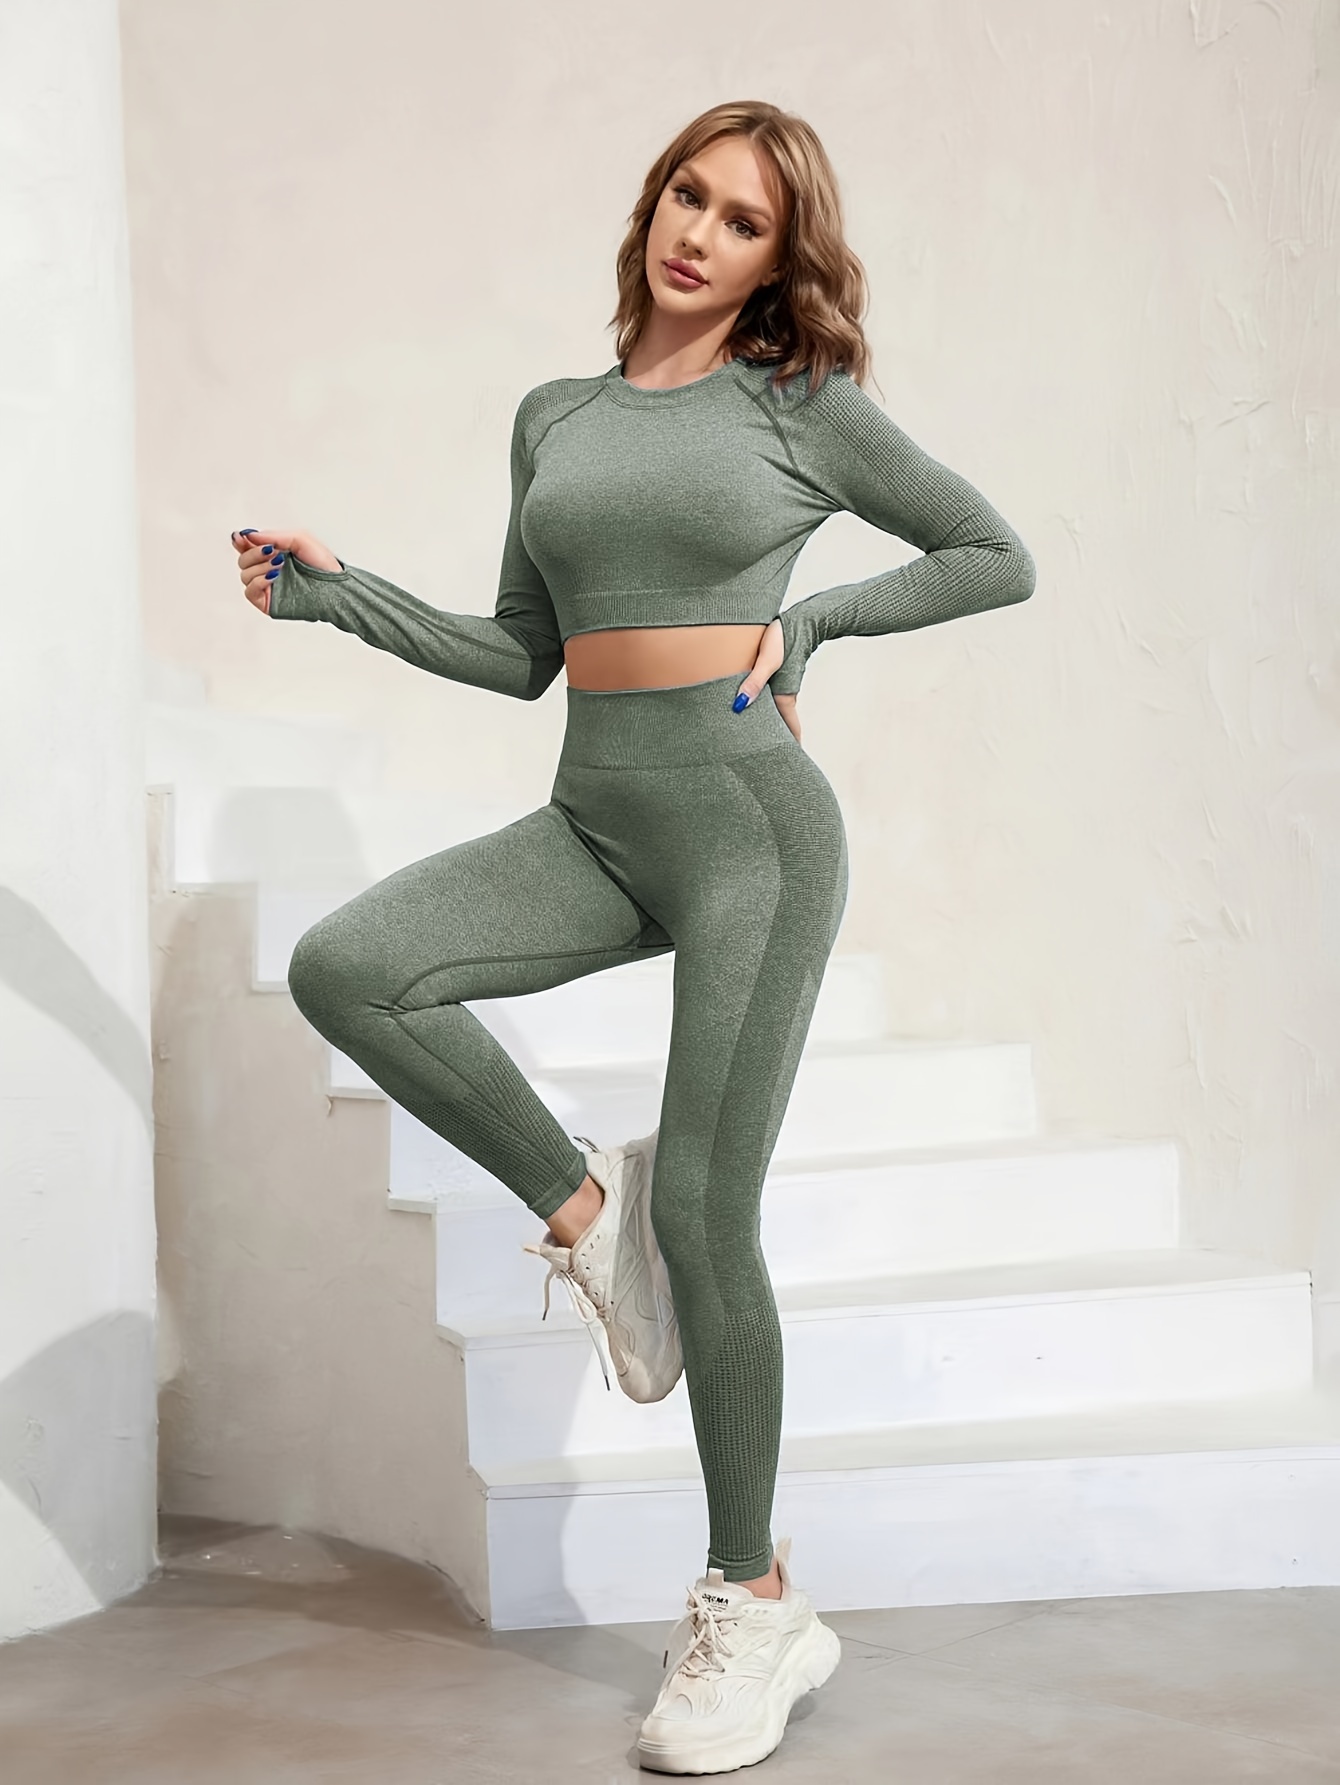 Women's workout Yoga Set, Have The Latest Wow Look